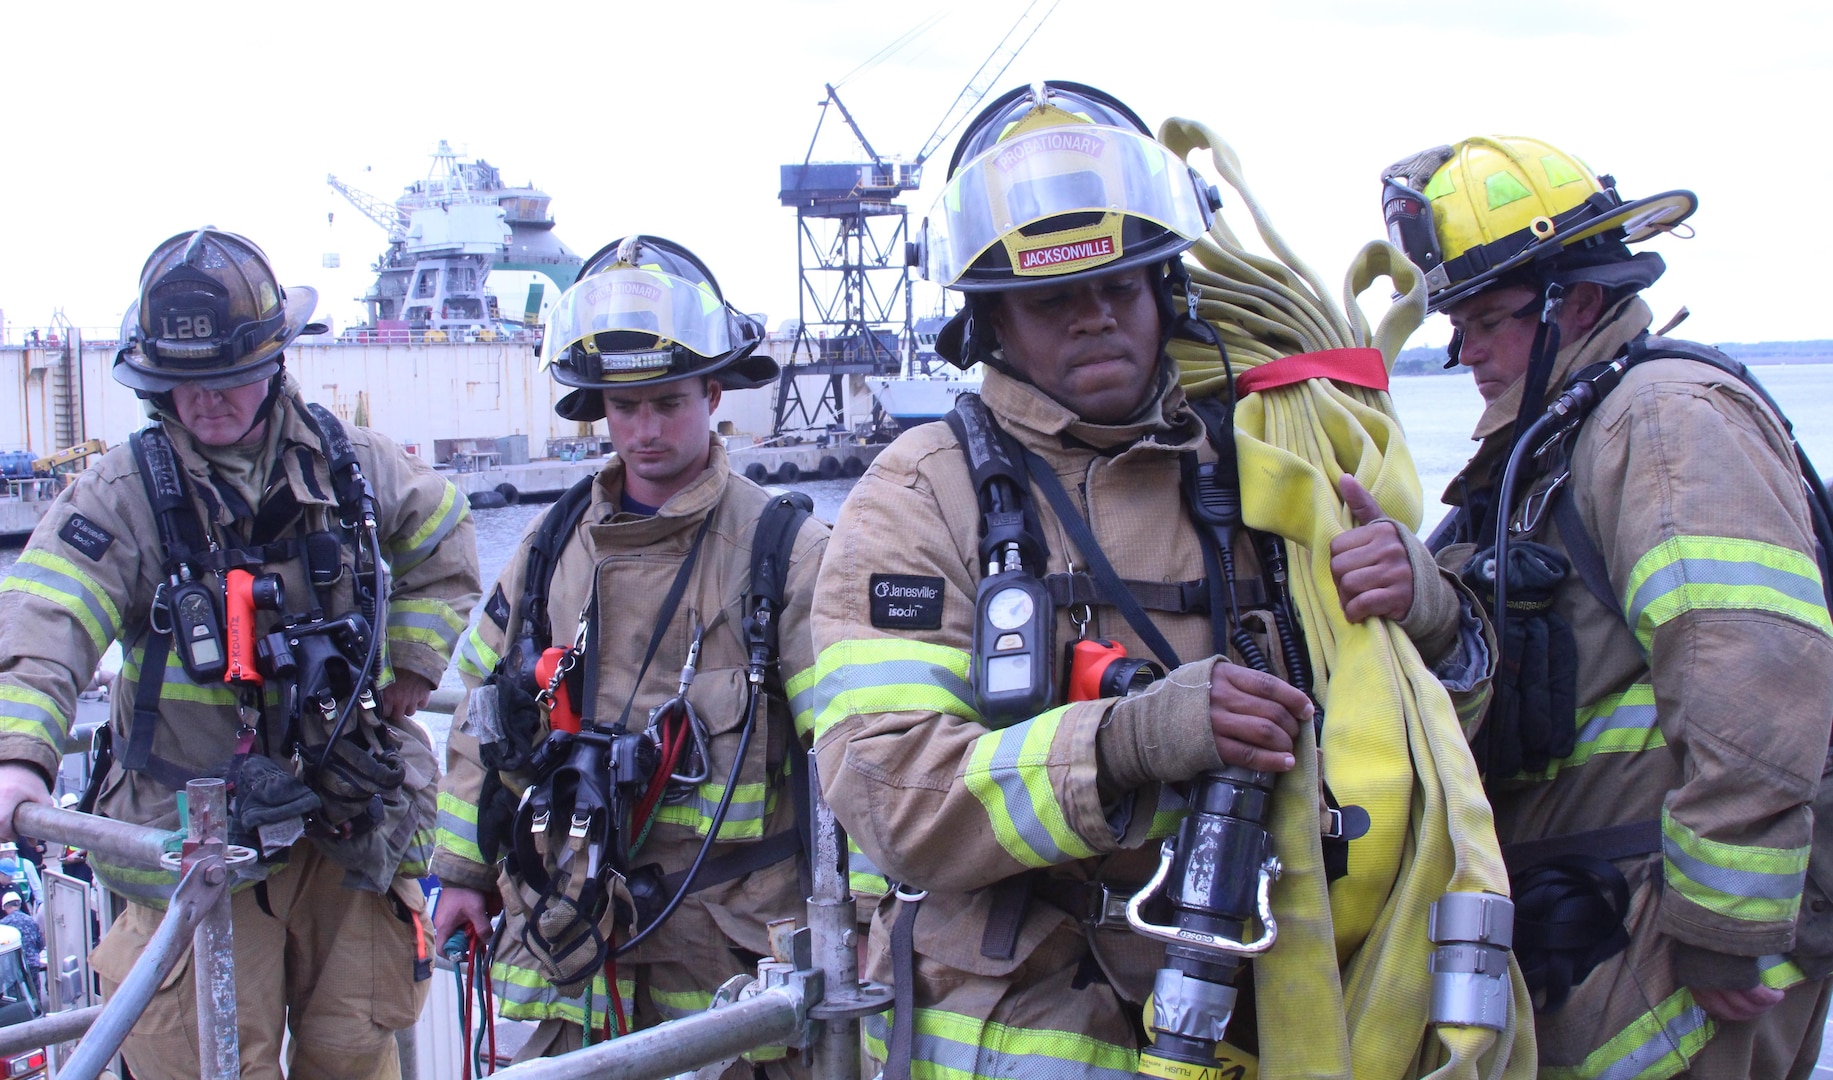 Members of JFRD haul equipment on board USS Tornado during a fire drill at the BAE Systems shipyard.  The local fire department was called in to augment the ship's crew and BAE first responders as a test of their ability to work together in a challenging shipyard environment.